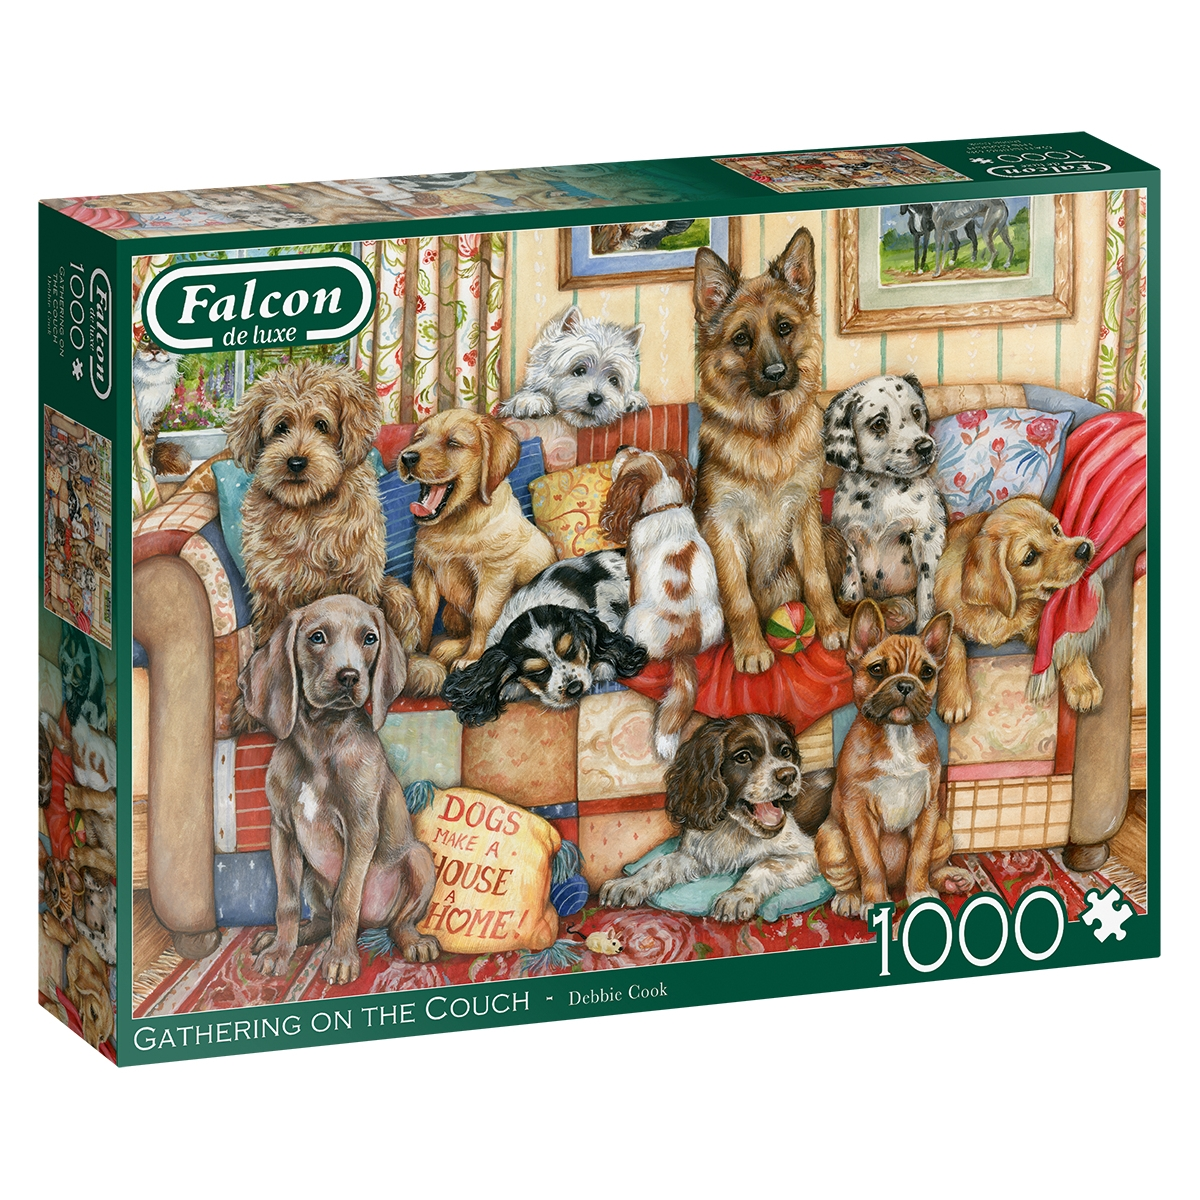 Couch-1000 Puzzle on Teile FALCON Jumbo Dog 11293 The Zubehör, Mehrfarben Gathering